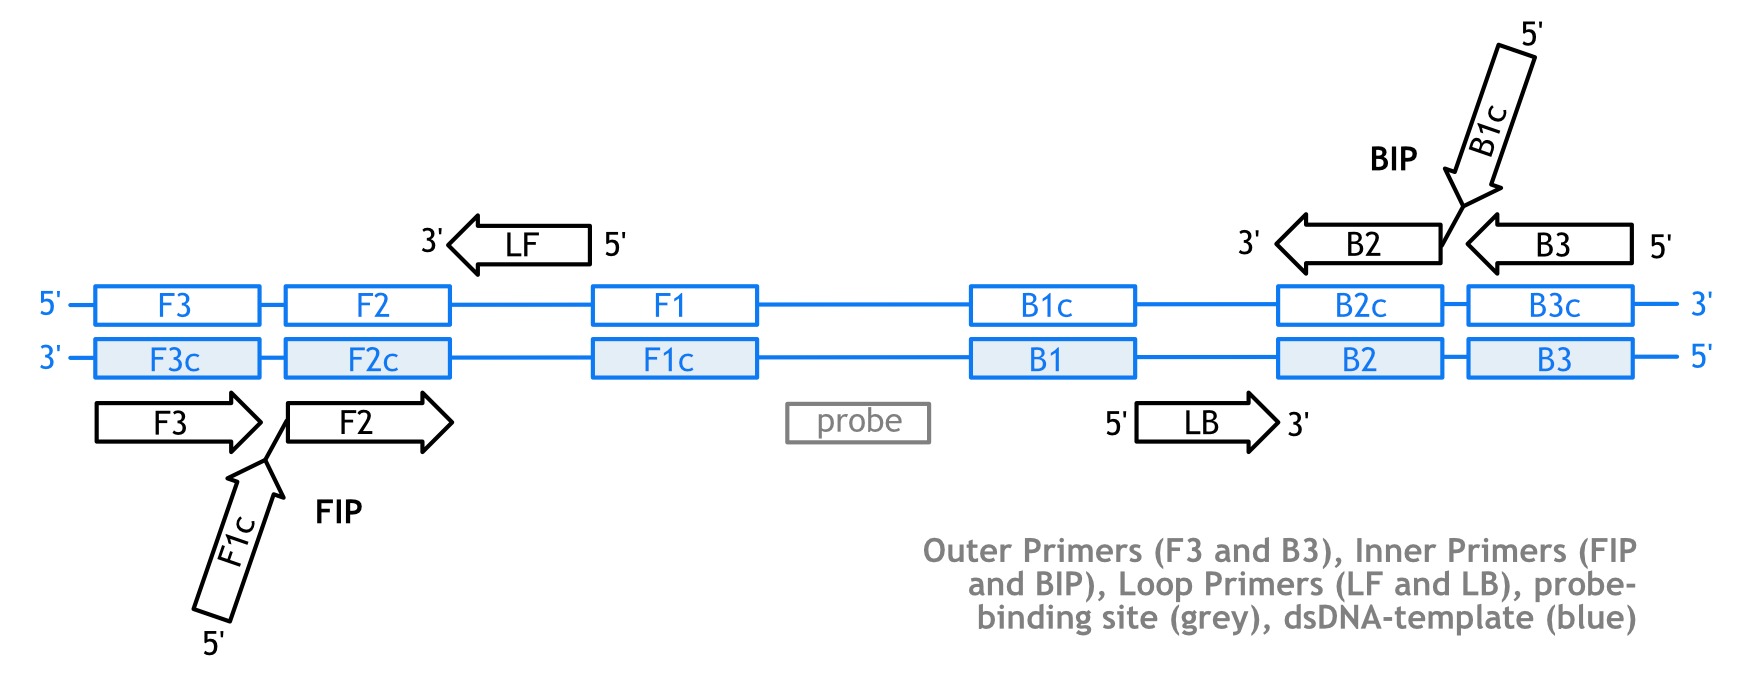 Figure 3. Standard Arrangement of Primers (and probe) for LAMP